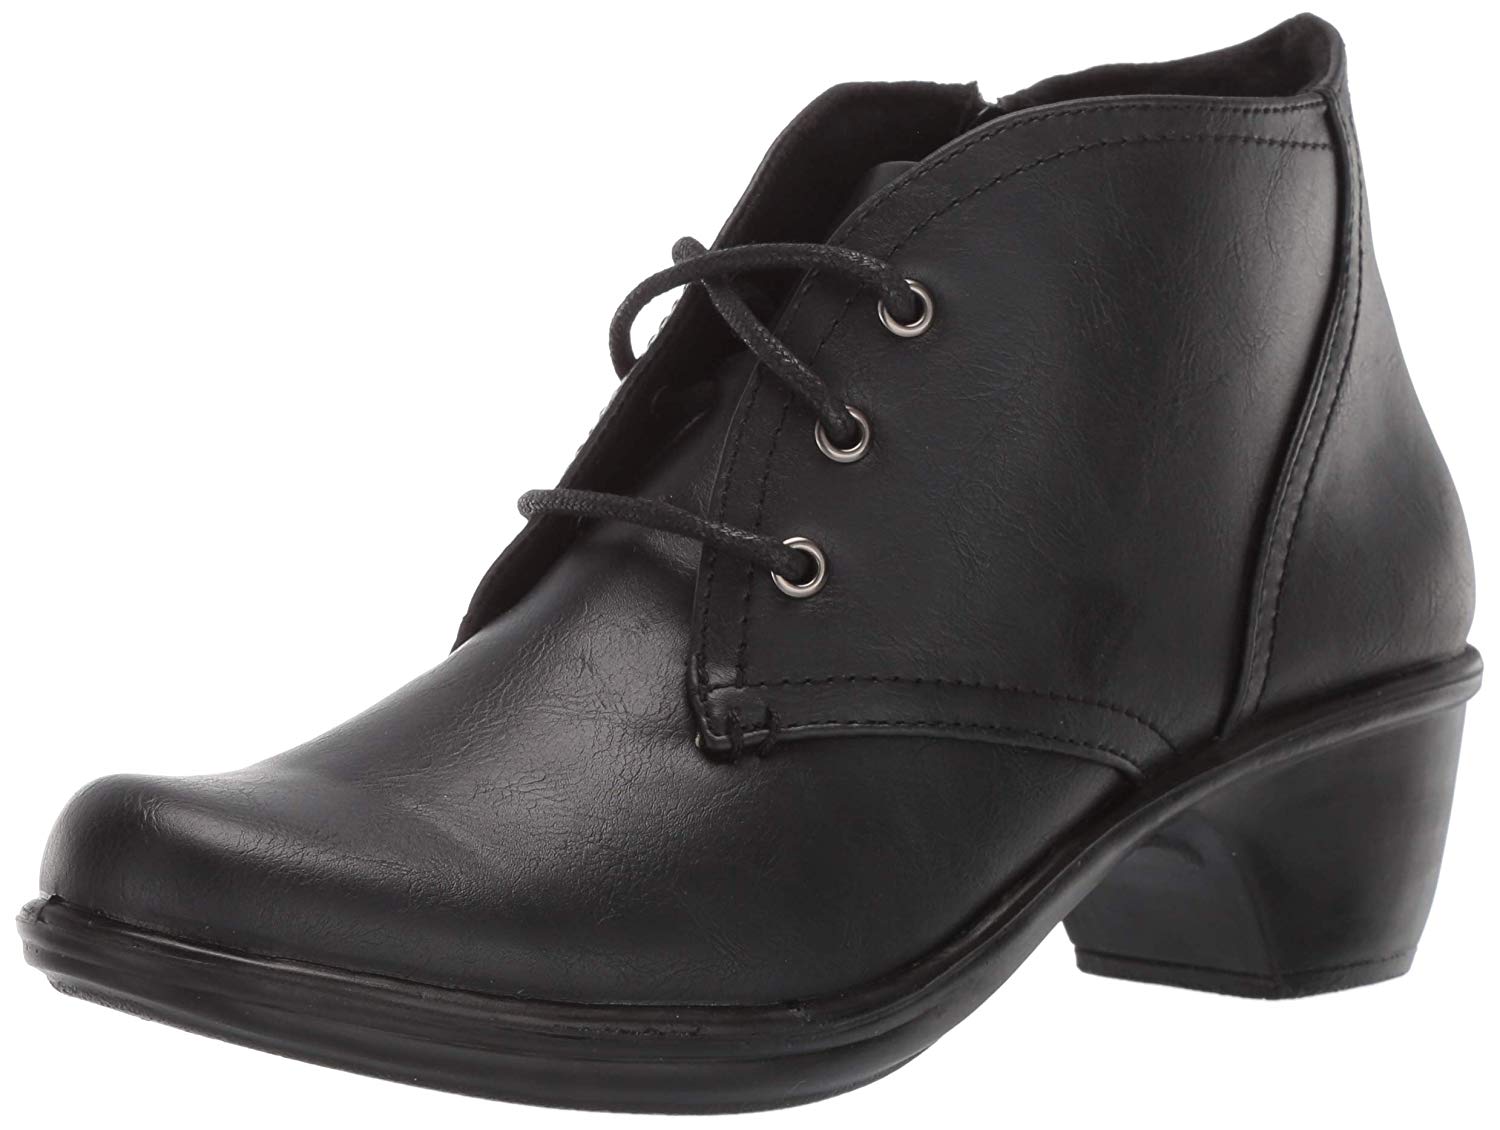 Easy Street Womens 30-9137 Round Toe Ankle Fashion Boots, Black, Size 8 ...